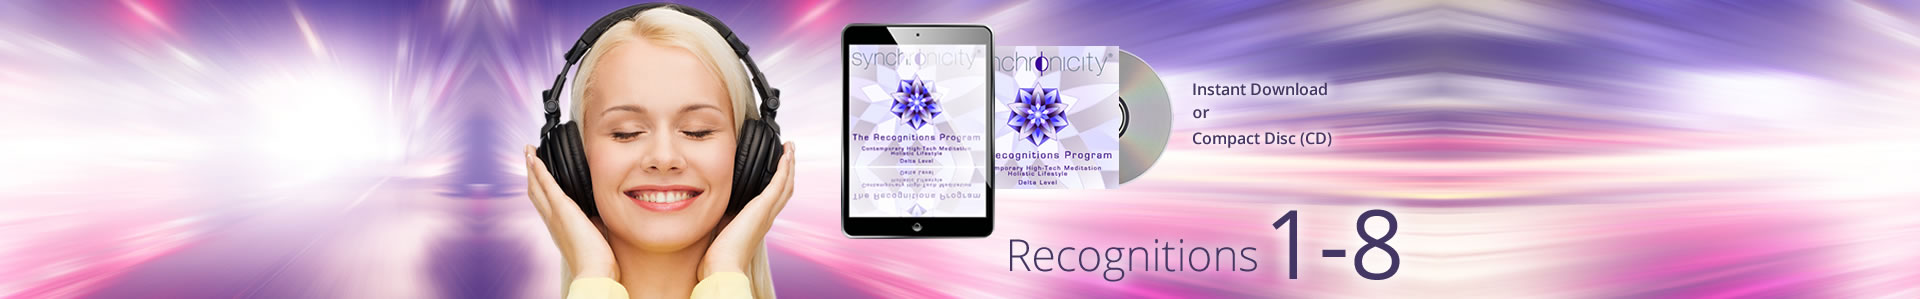 Buy-Recognitions-Page-Header-2